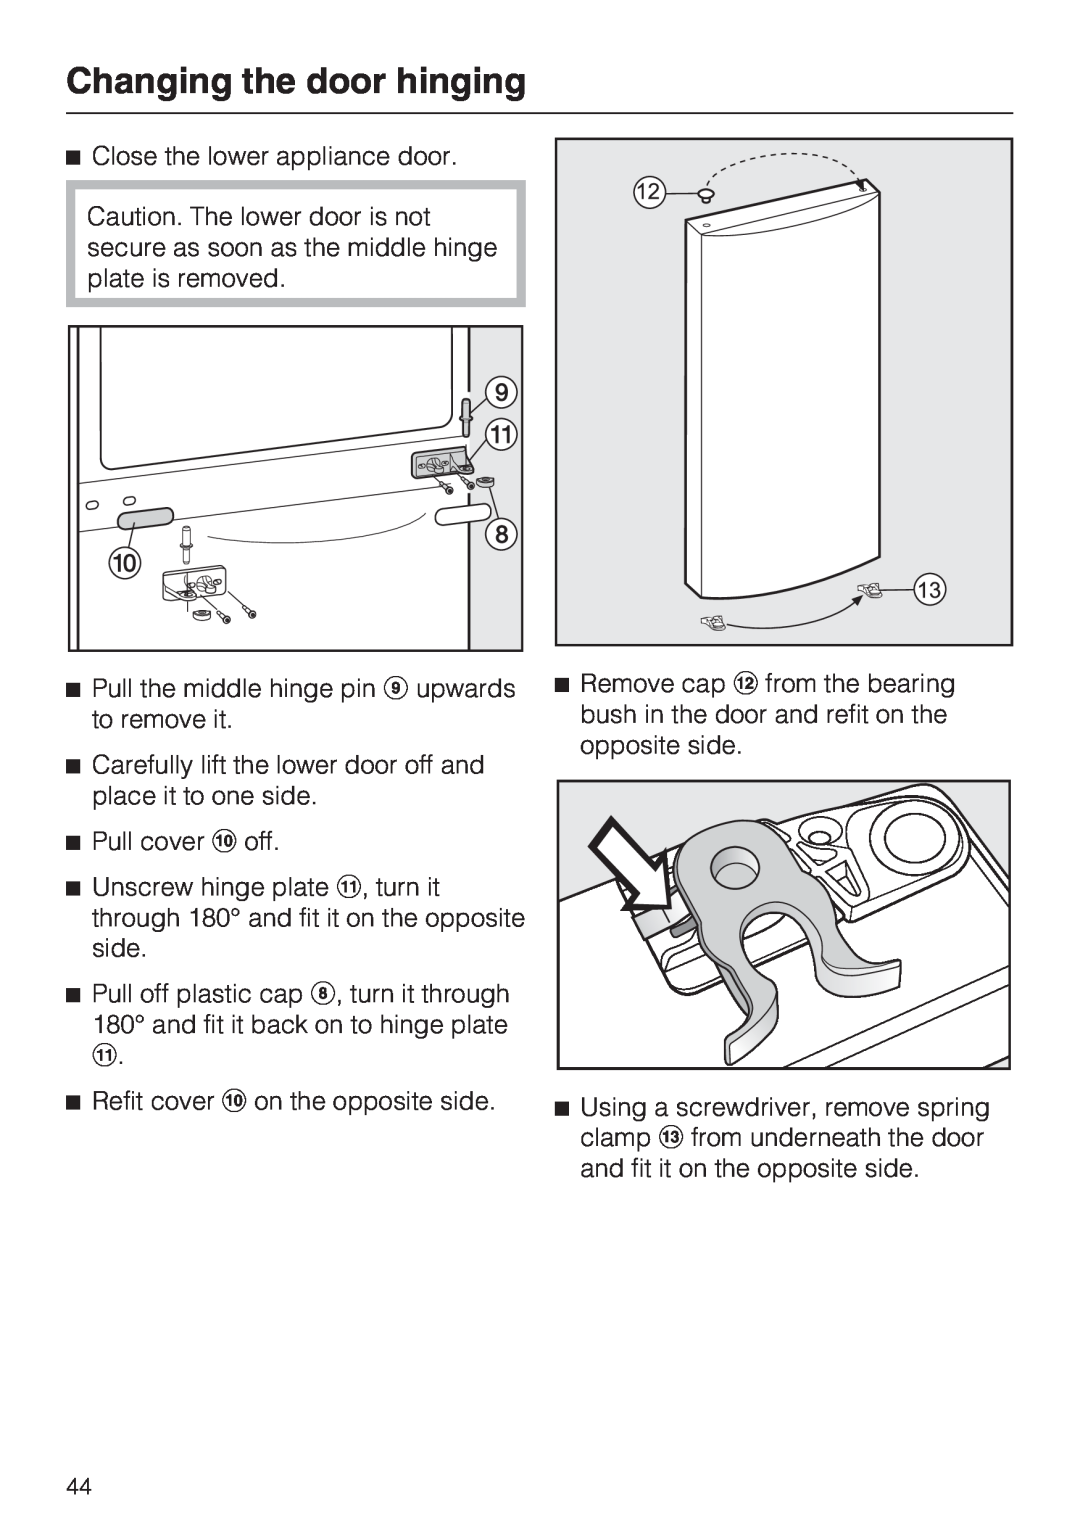 Miele KDN 12623 S-1/-2 installation instructions Changing the door hinging, Close the lower appliance door 